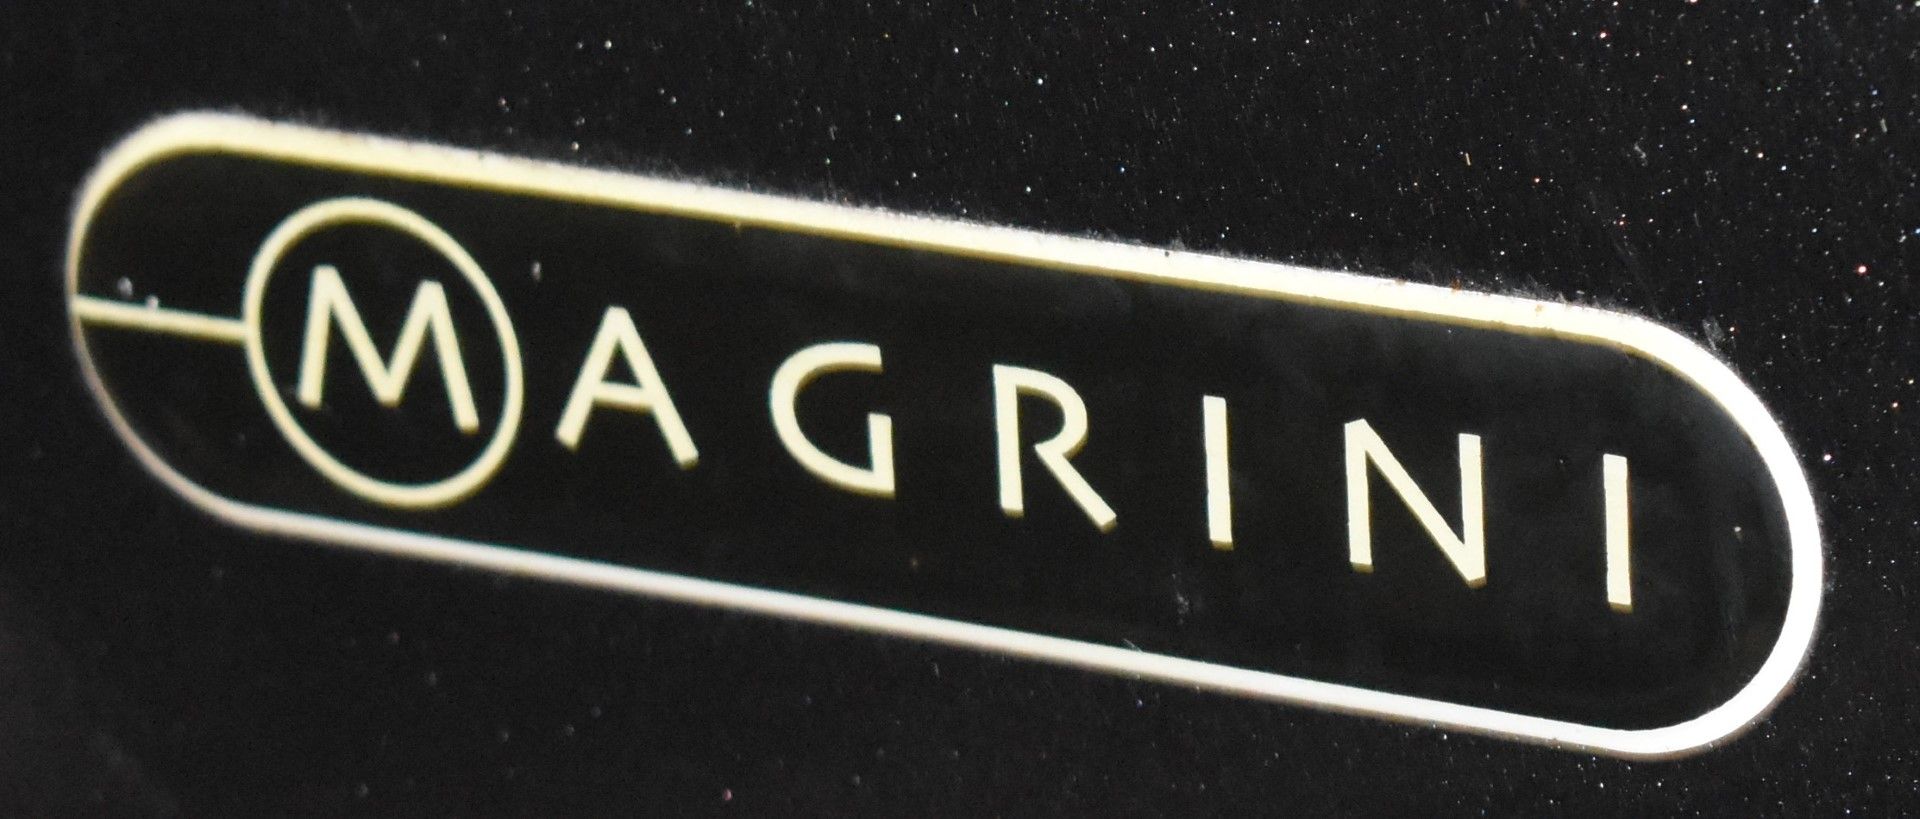 1 x Magrini 3 Group Coffee Espresso Machine With Stainless Steel and Black Finish - H47 x W106 x D57 - Image 9 of 9